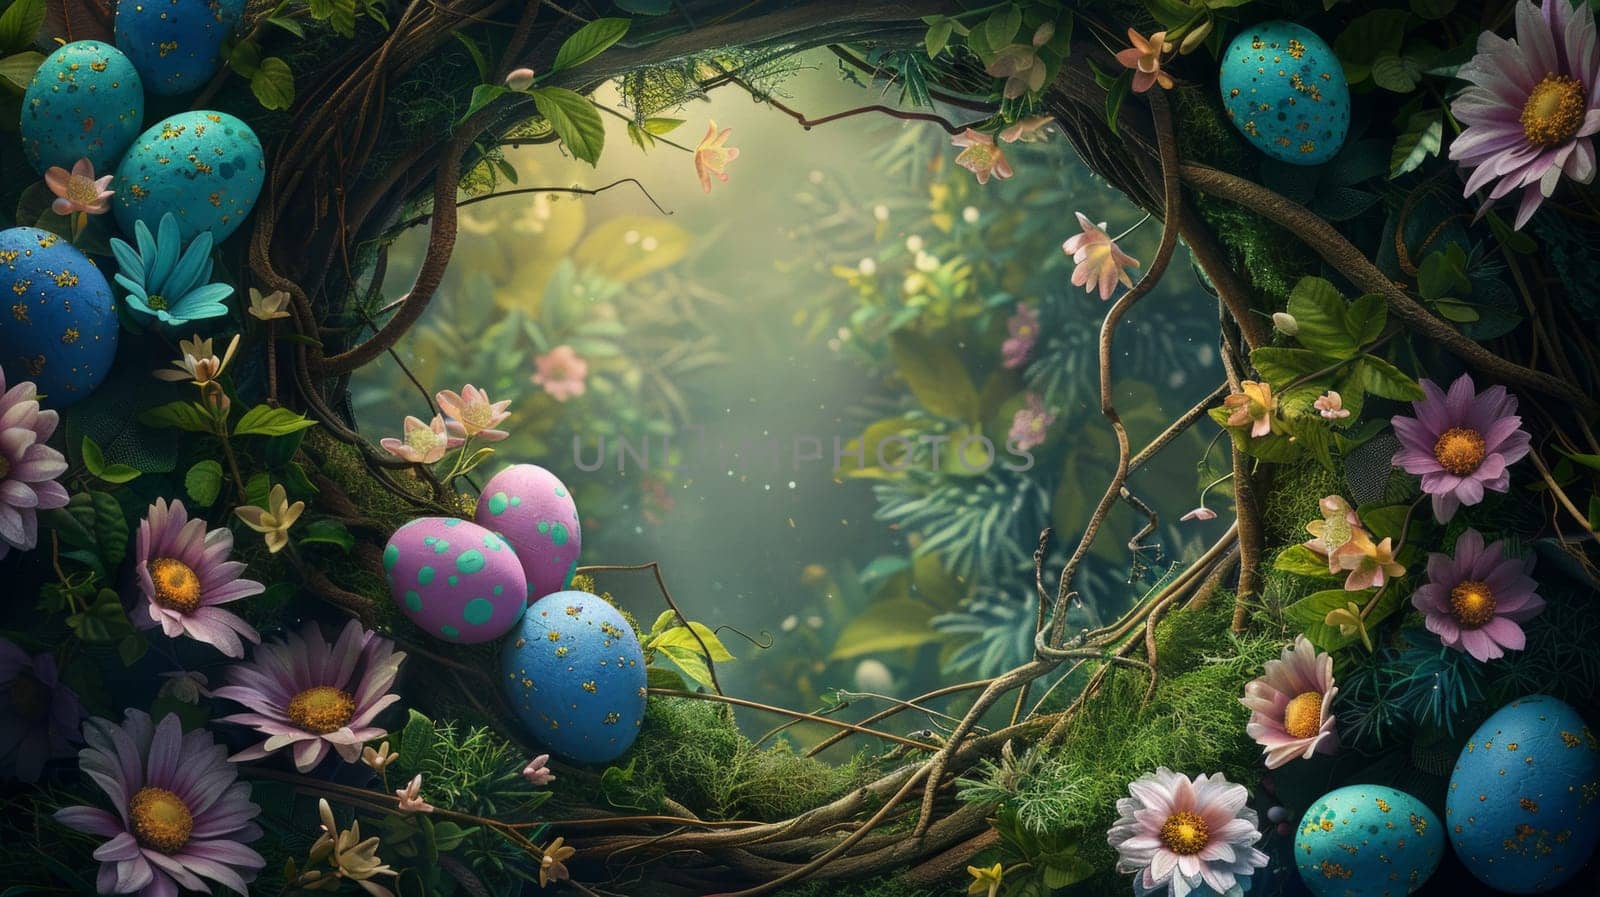 A whimsical painting featuring vibrant eggs nestled among colorful flowers in a magical forest setting by but_photo